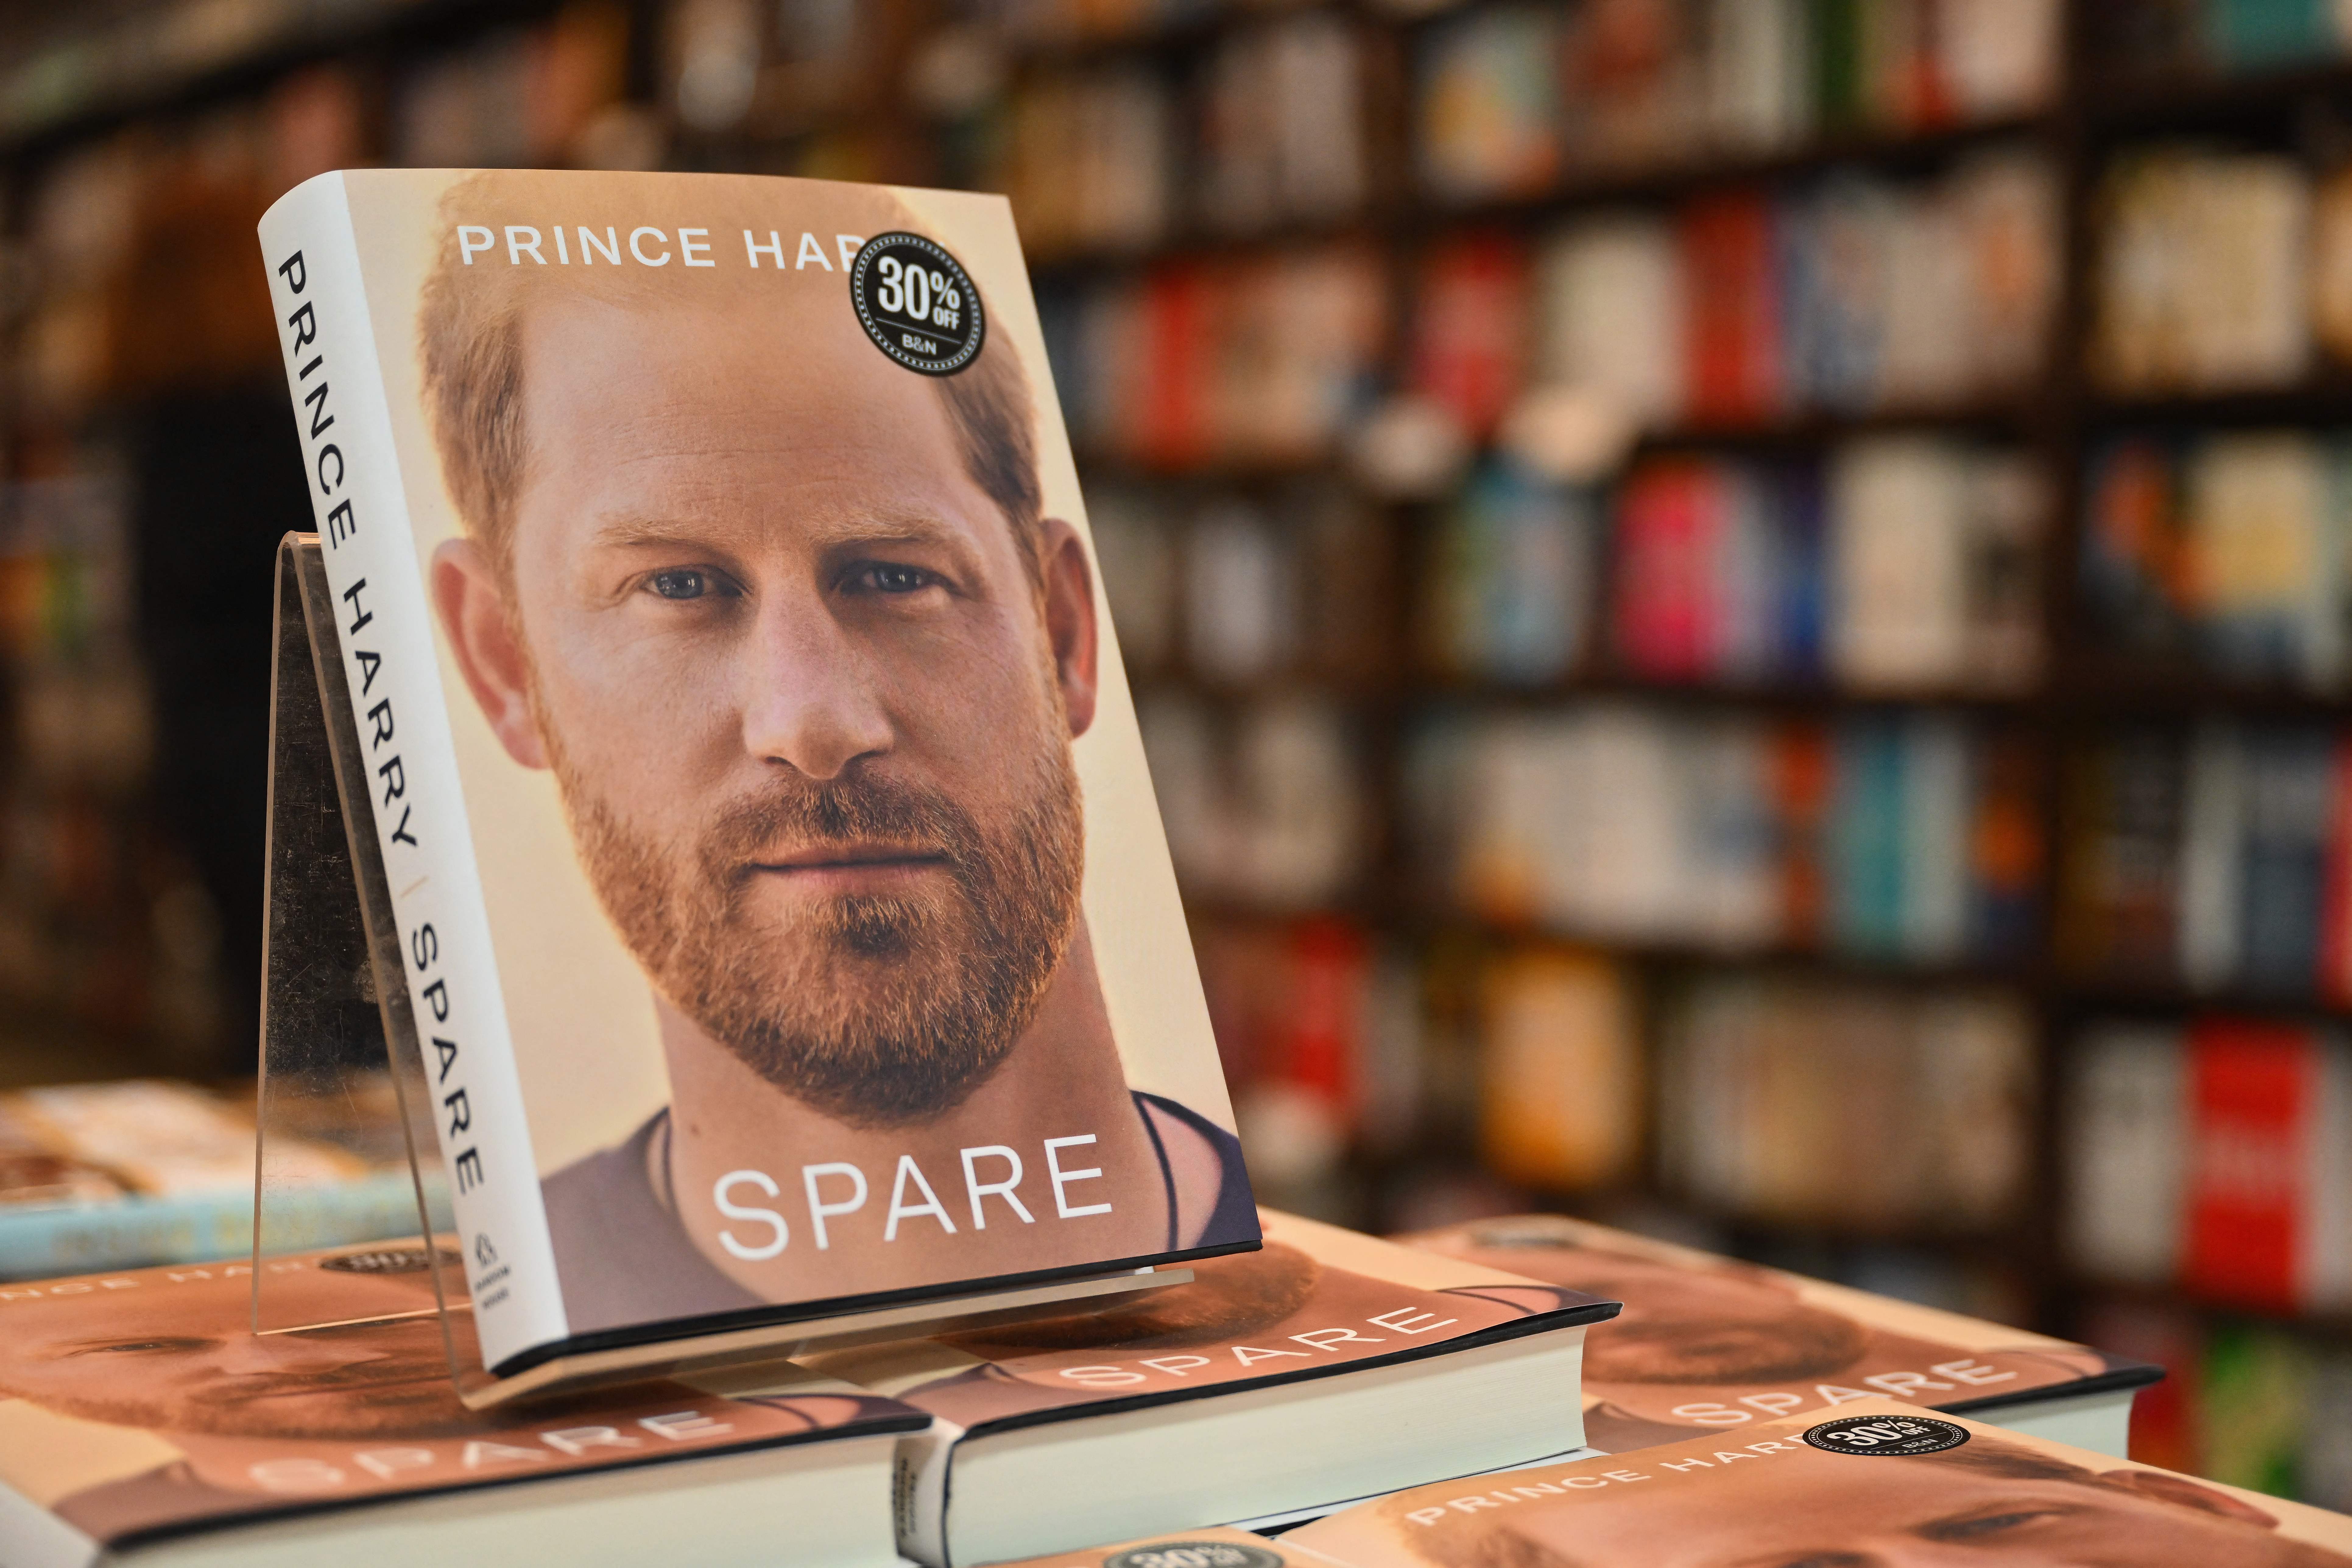 Prince Harry's book "Spare" displayed at a Barnes & Noble bookstore on January 10, 2023 in New York City | Source: Getty Images